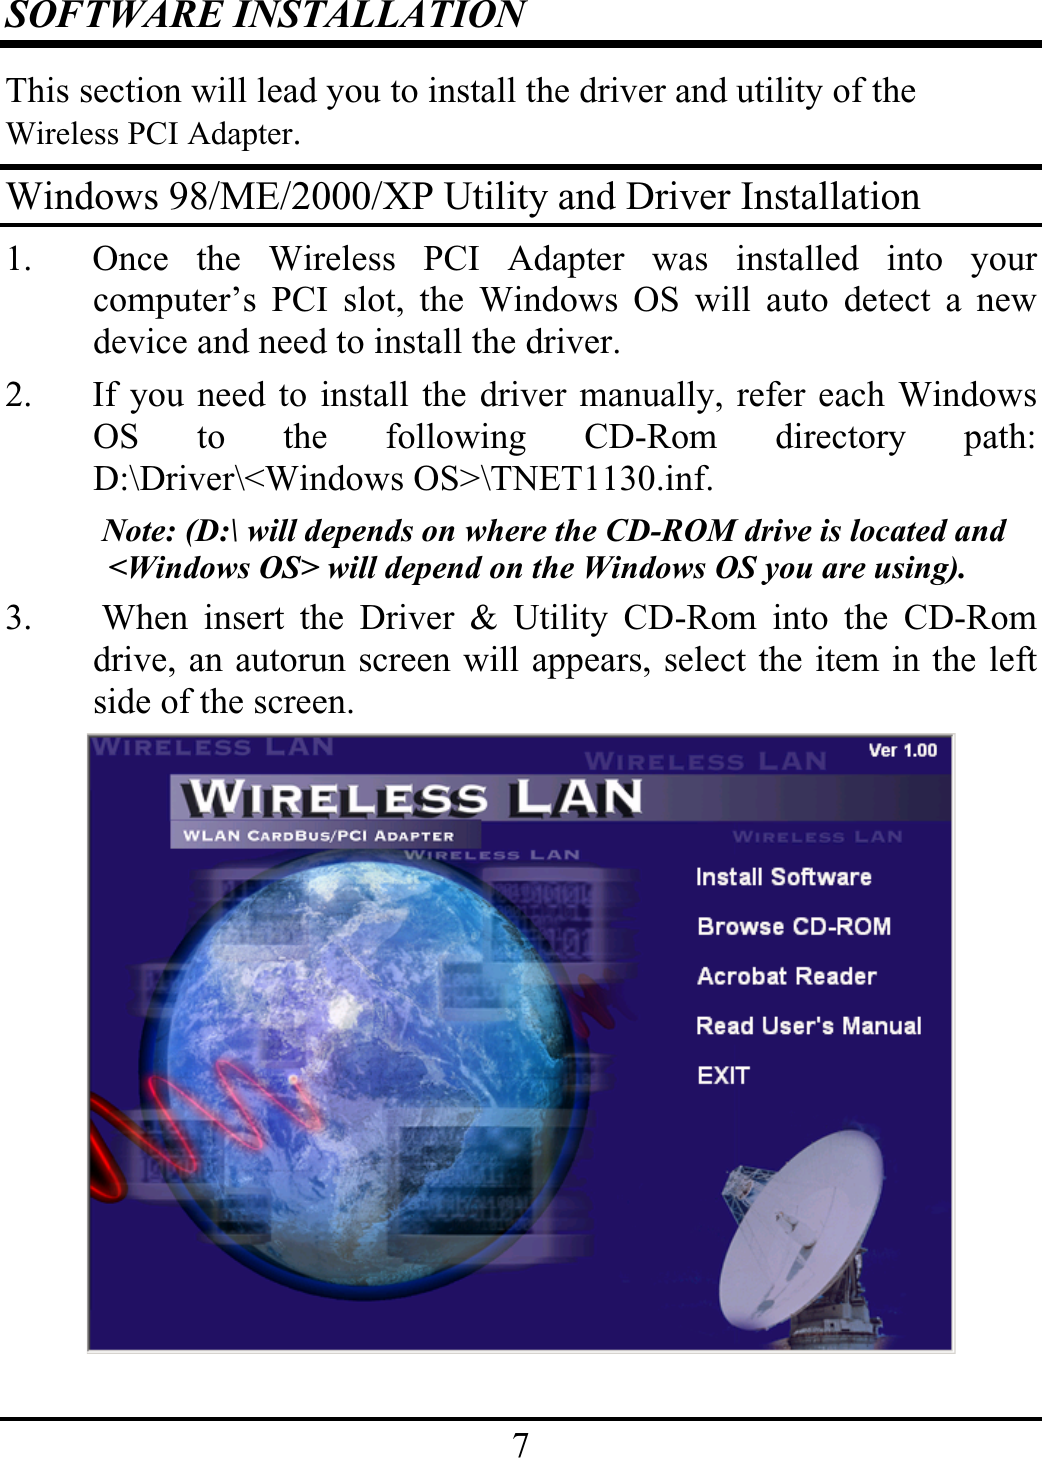 7SOFTWARE INSTALLATIONThis section will lead you to install the driver and utility of theWireless PCI Adapter.Windows 98/ME/2000/XP Utility and Driver Installation1. Once the Wireless PCI Adapter was installed into yourcomputer’s PCI slot, the Windows OS will auto detect a newdevice and need to install the driver.2. If you need to install the driver manually, refer each WindowsOS to the following CD-Rom directory path:D:\Driver\&lt;Windows OS&gt;\TNET1130.inf.Note: (D:\ will depends on where the CD-ROM drive is located and &lt;Windows OS&gt; will depend on the Windows OS you are using).3.  When insert the Driver &amp; Utility CD-Rom into the CD-Romdrive, an autorun screen will appears, select the item in the leftside of the screen.